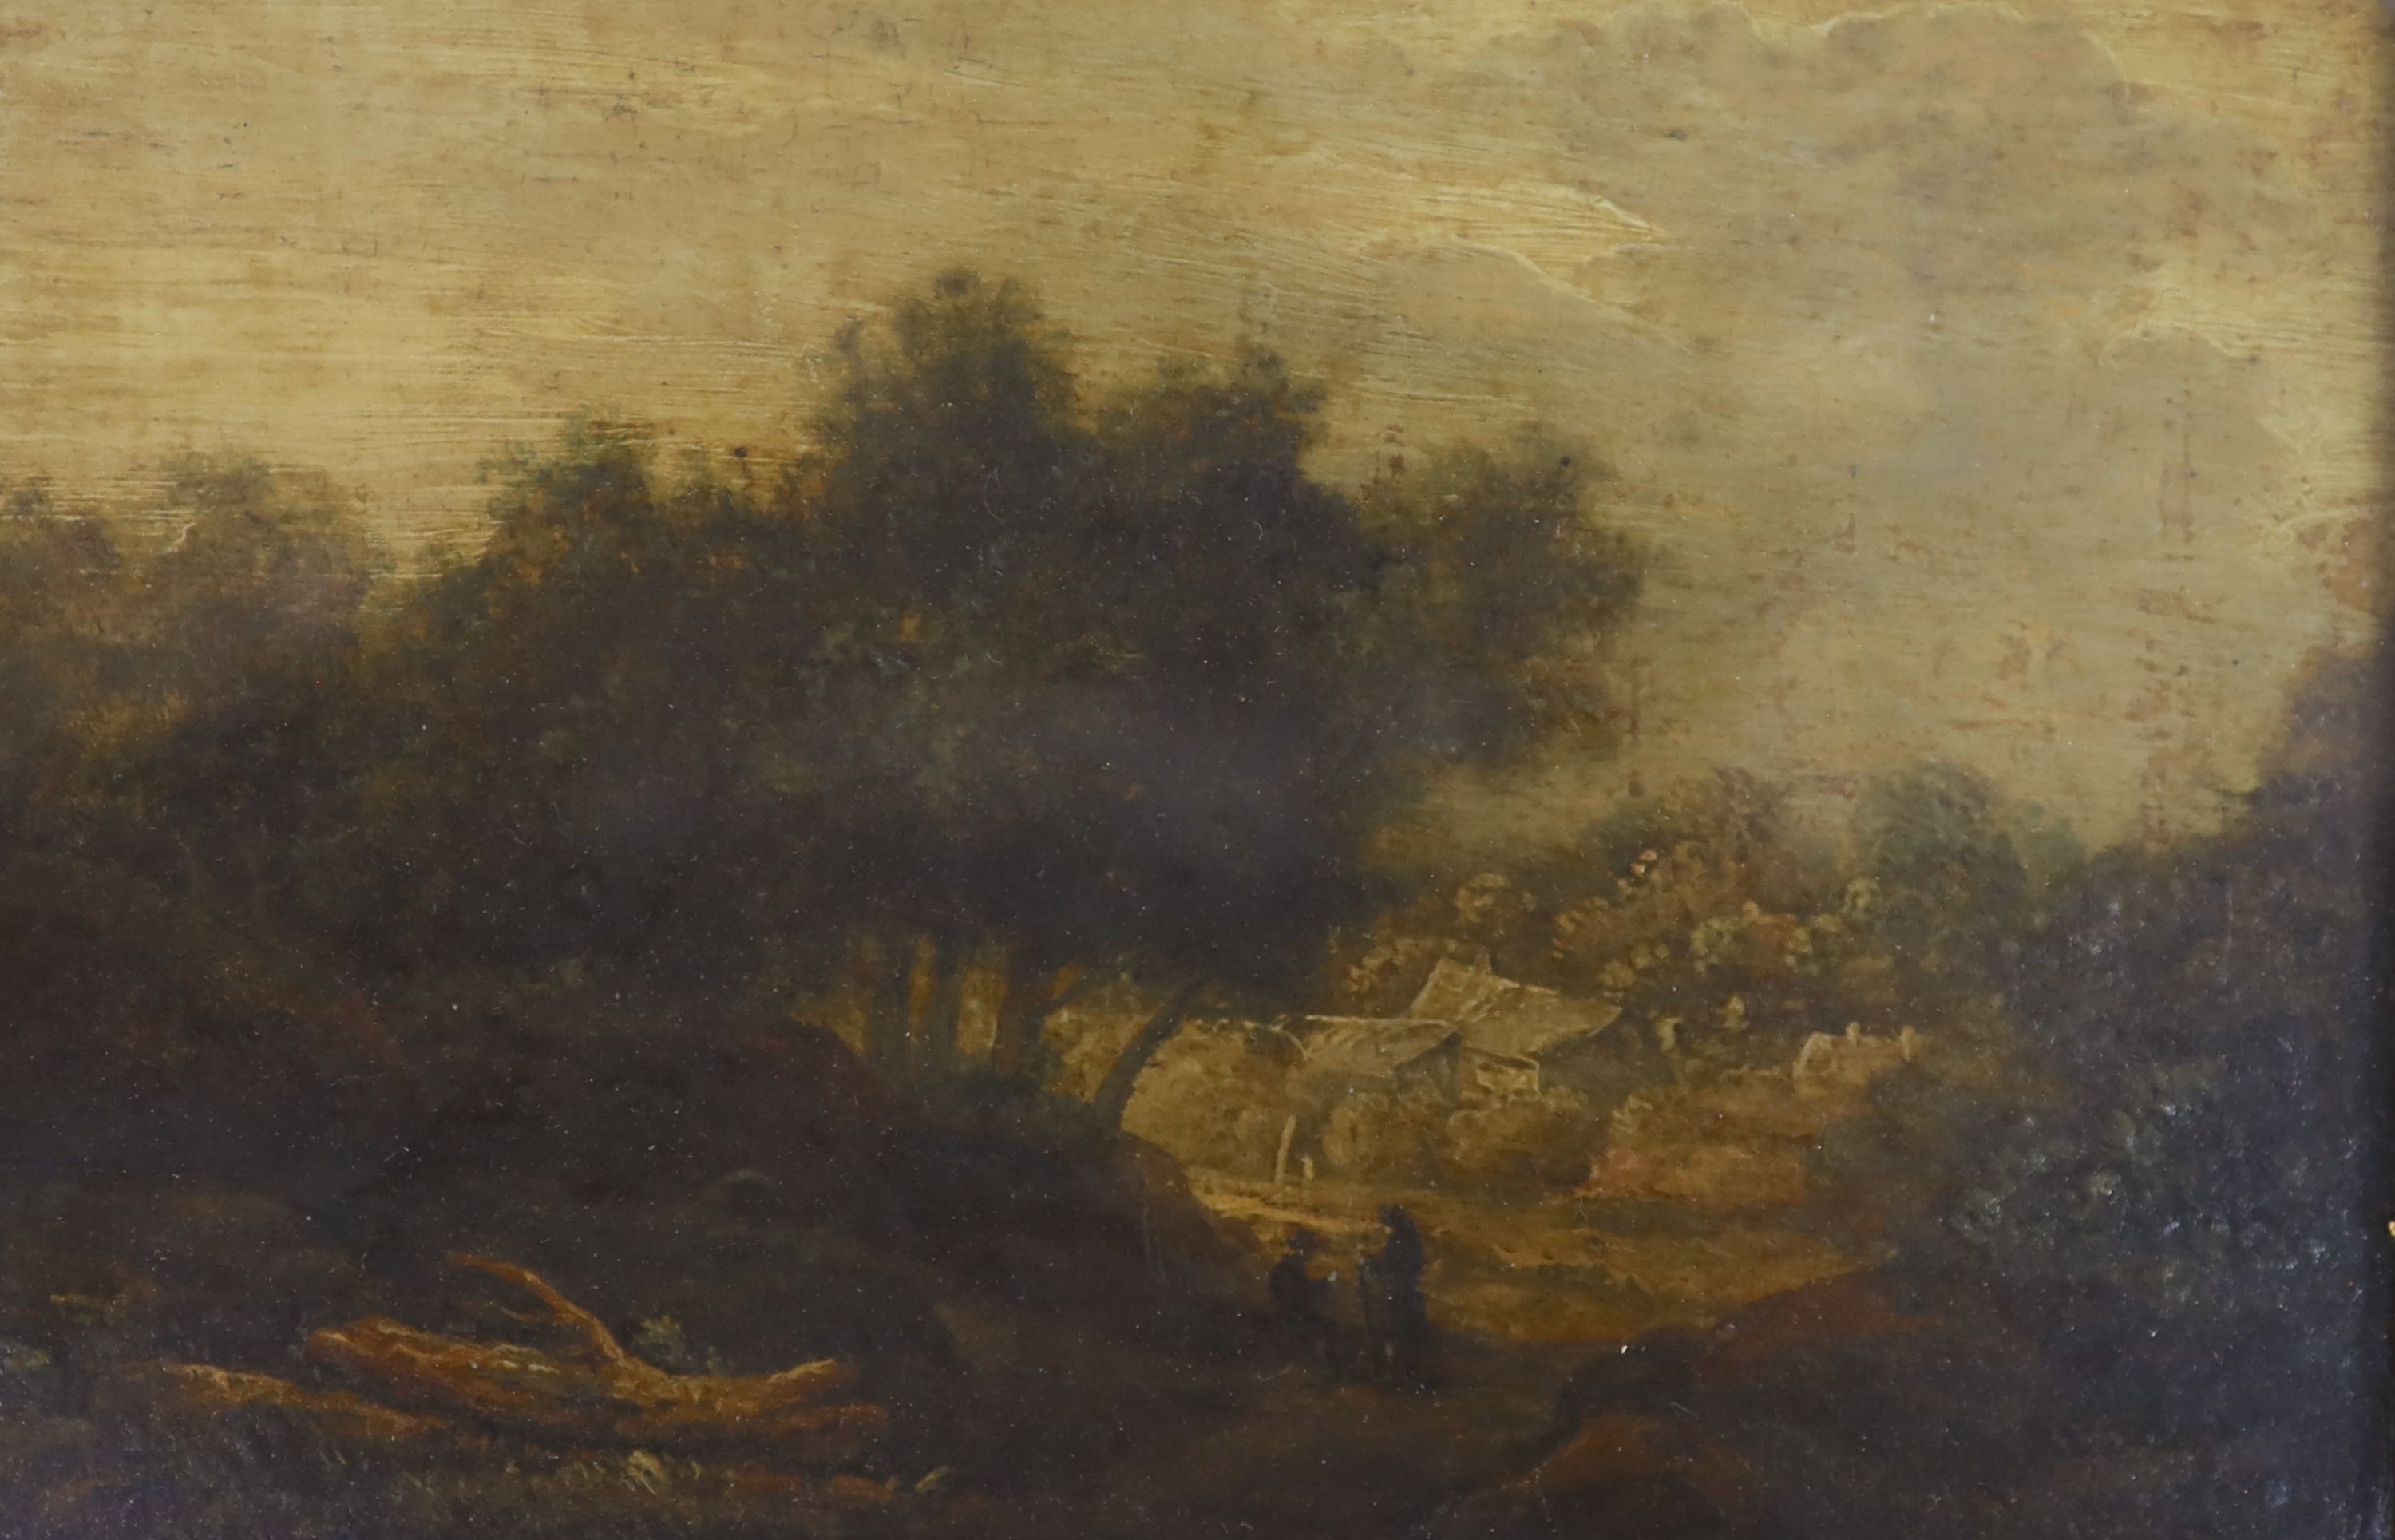 Late 18th century English School, pair of oils on wooden panels, Travellers in landscapes, 17 x 25cm